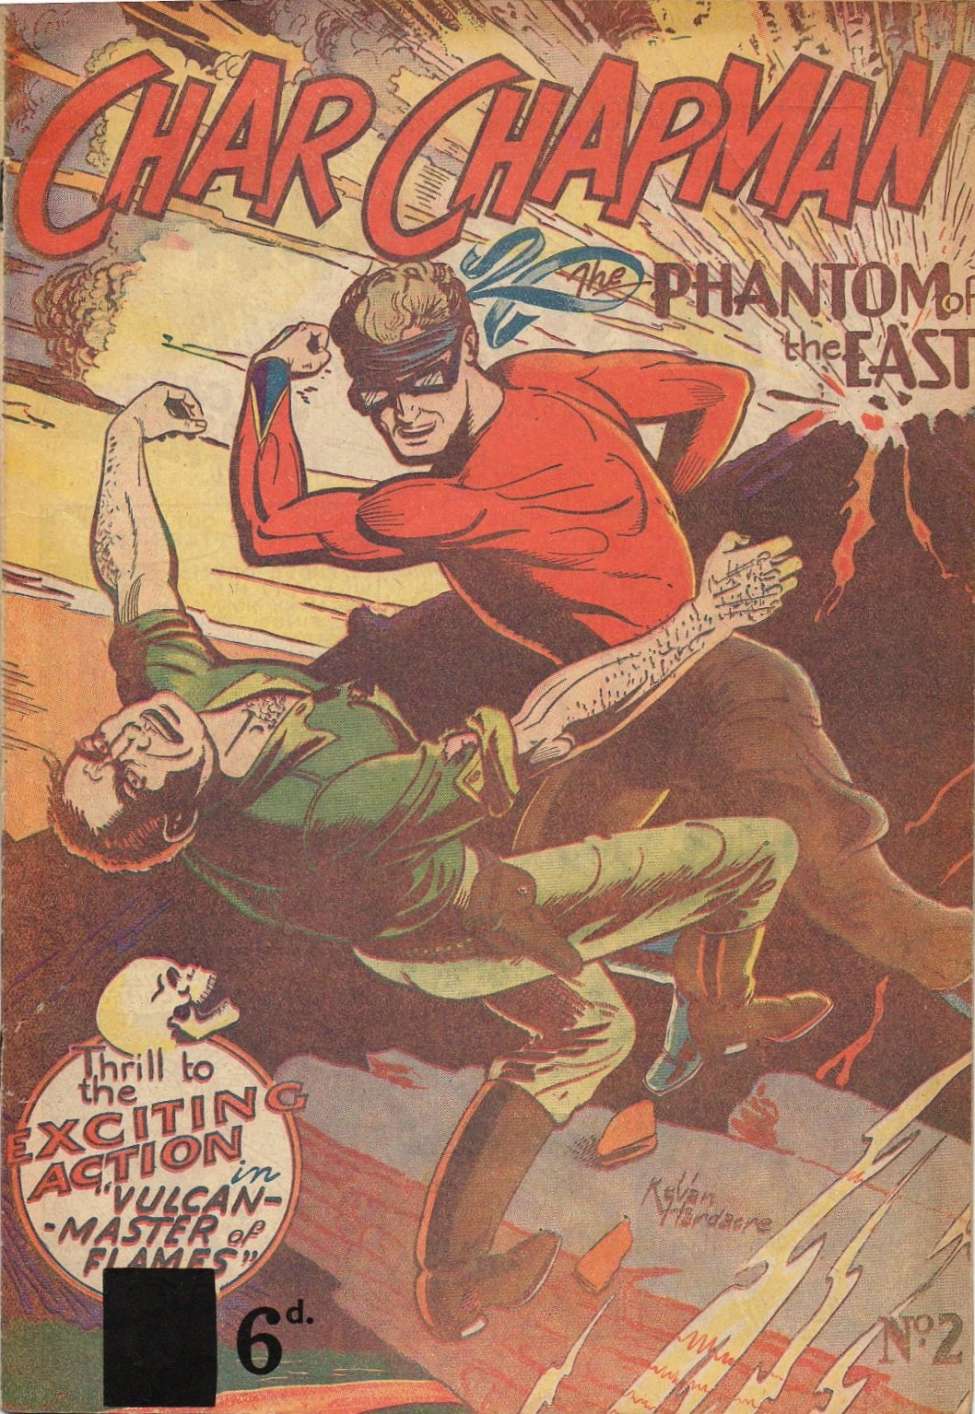 Comic Book Cover For Char Chapman, The Phantom of the East 2